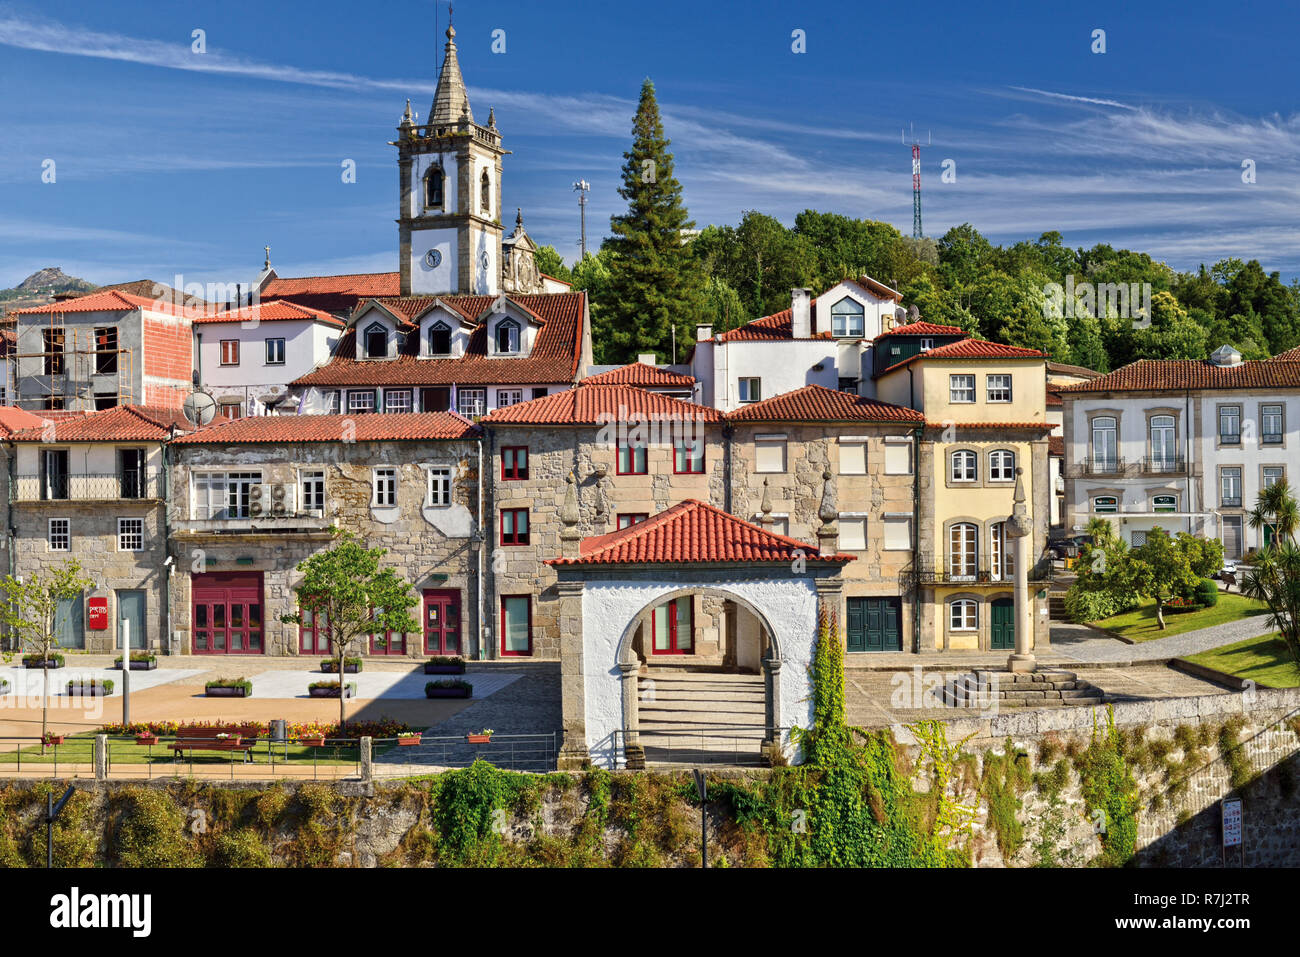 Idyllic historic town center with medieval architecture Stock Photo